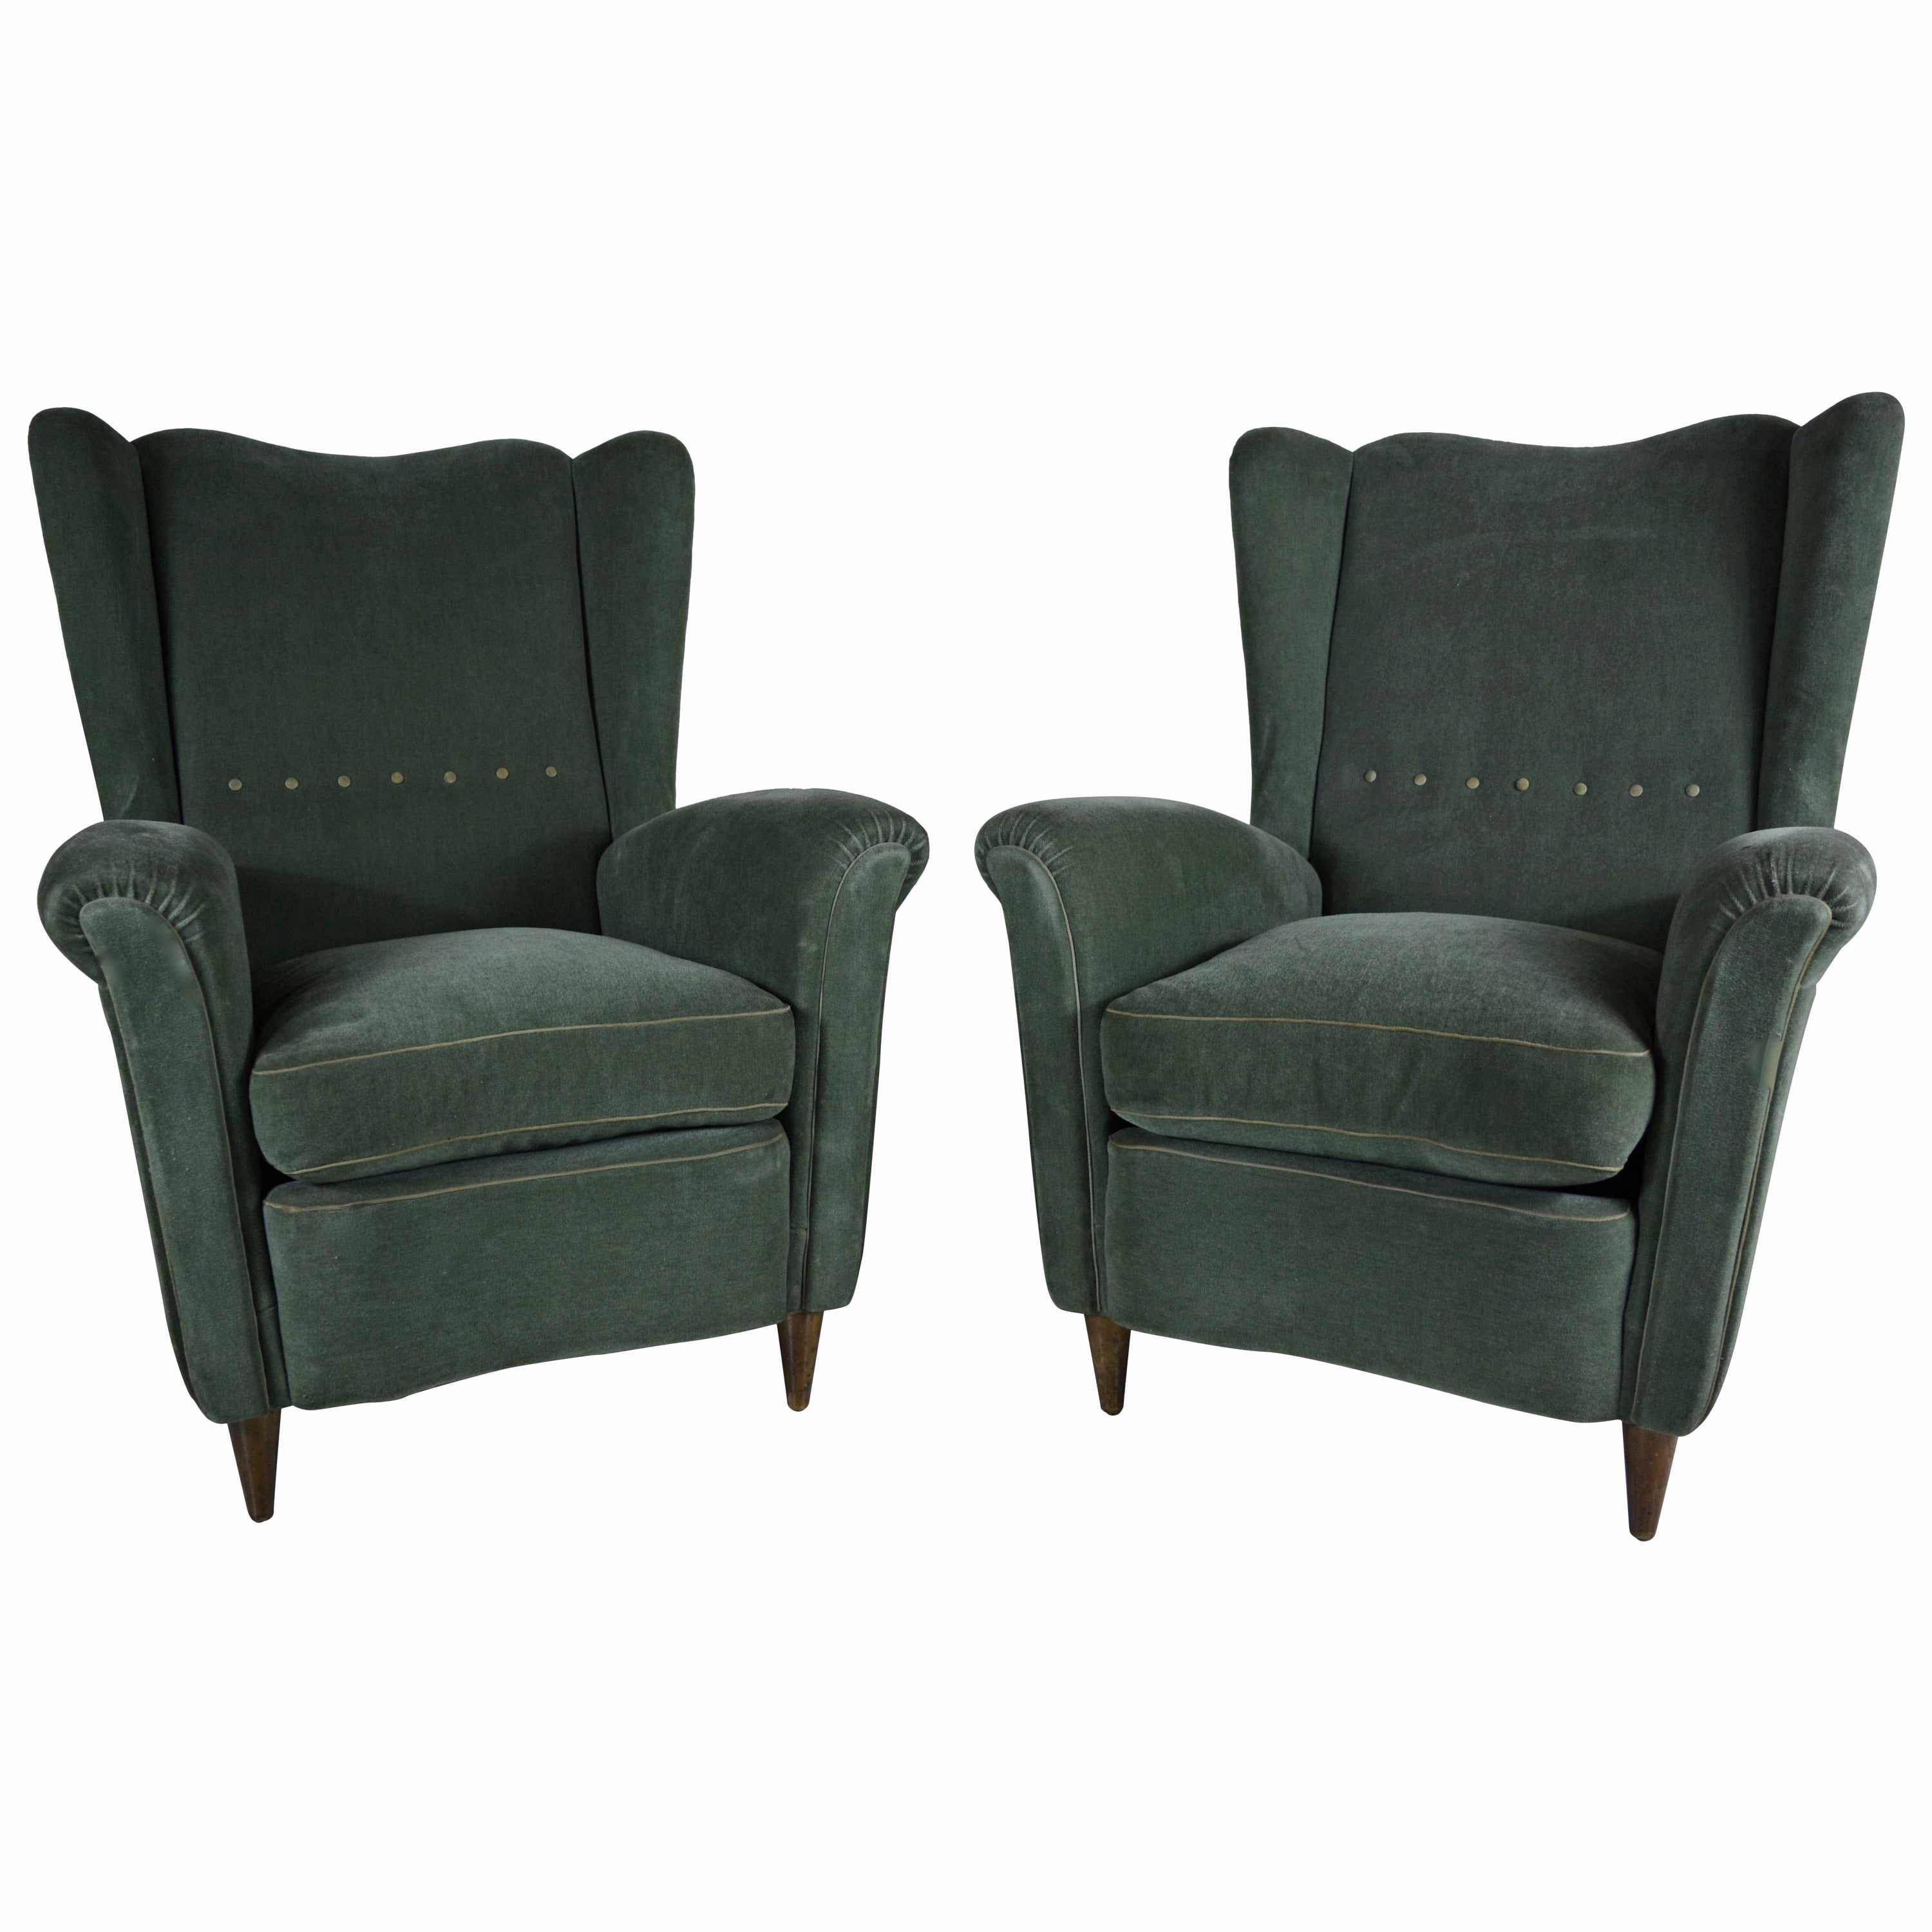 Pair of Italian Wingback Lounge Chairs in Original Olive Mohair, circa 1940s